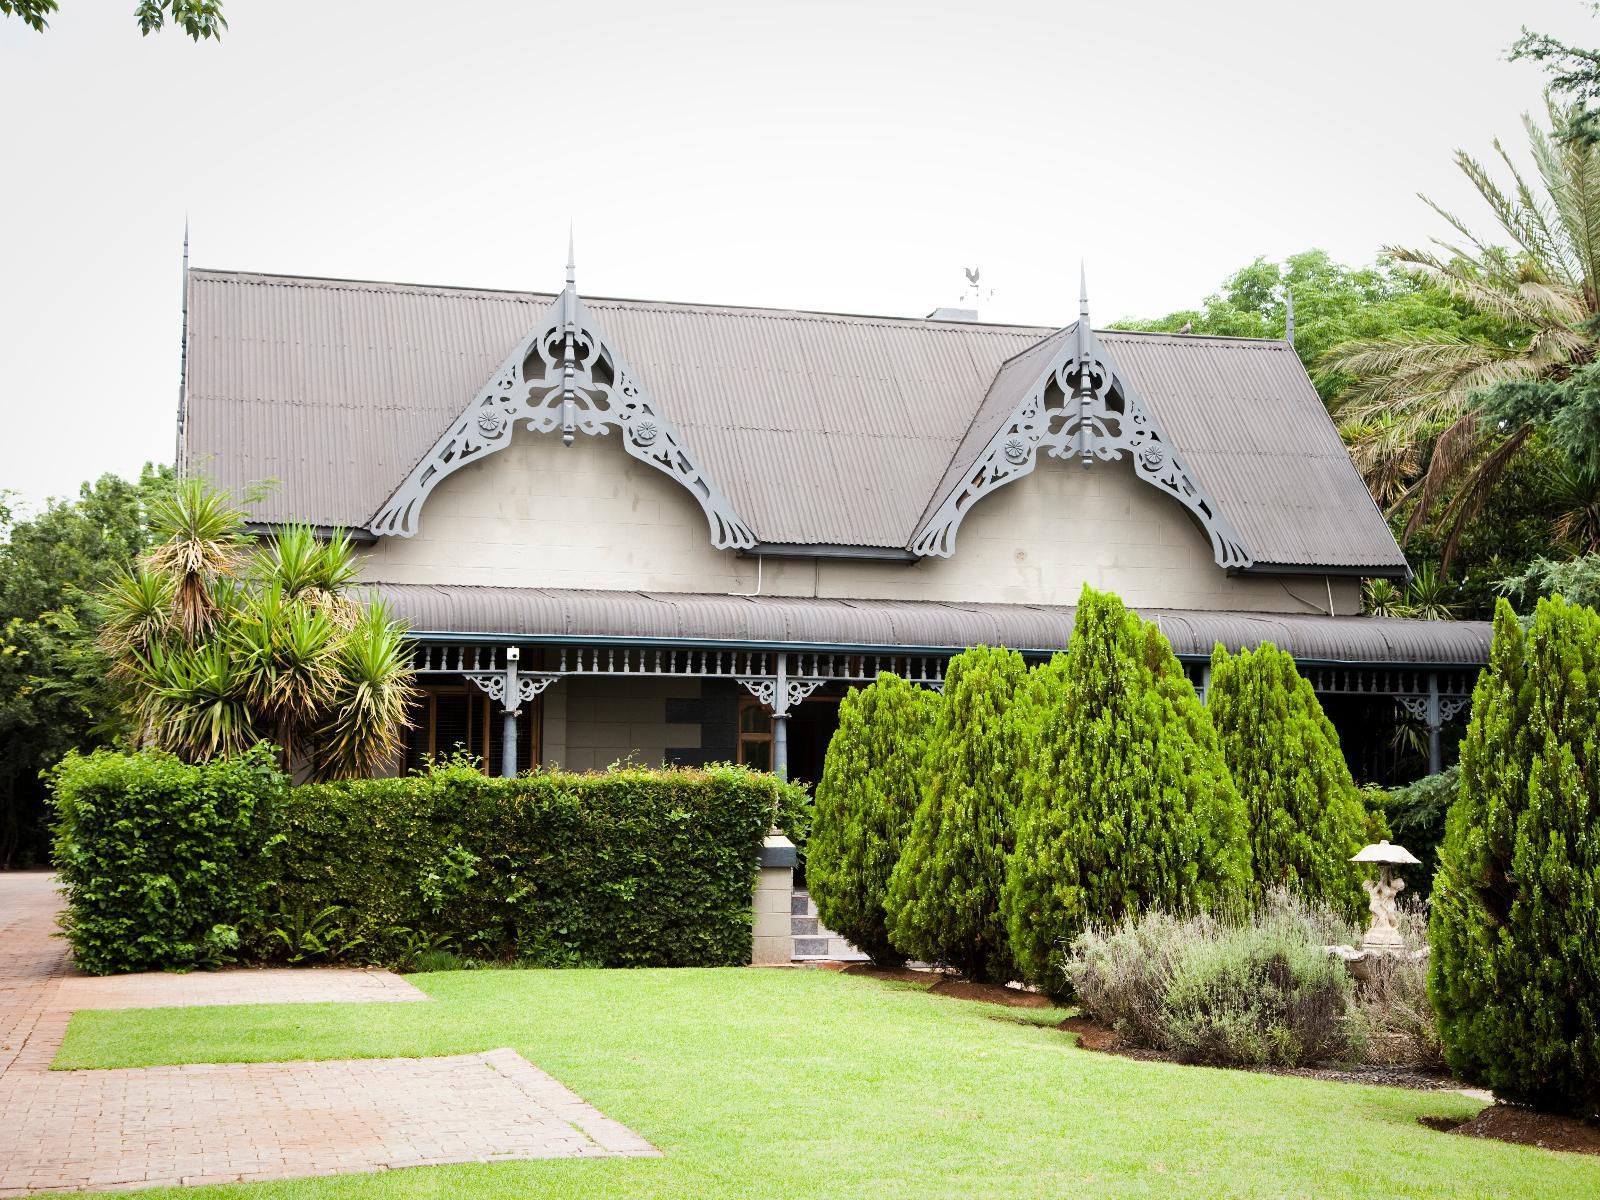 The Gables Guest House Middelburg Mpumalanga Mpumalanga South Africa Building, Architecture, House